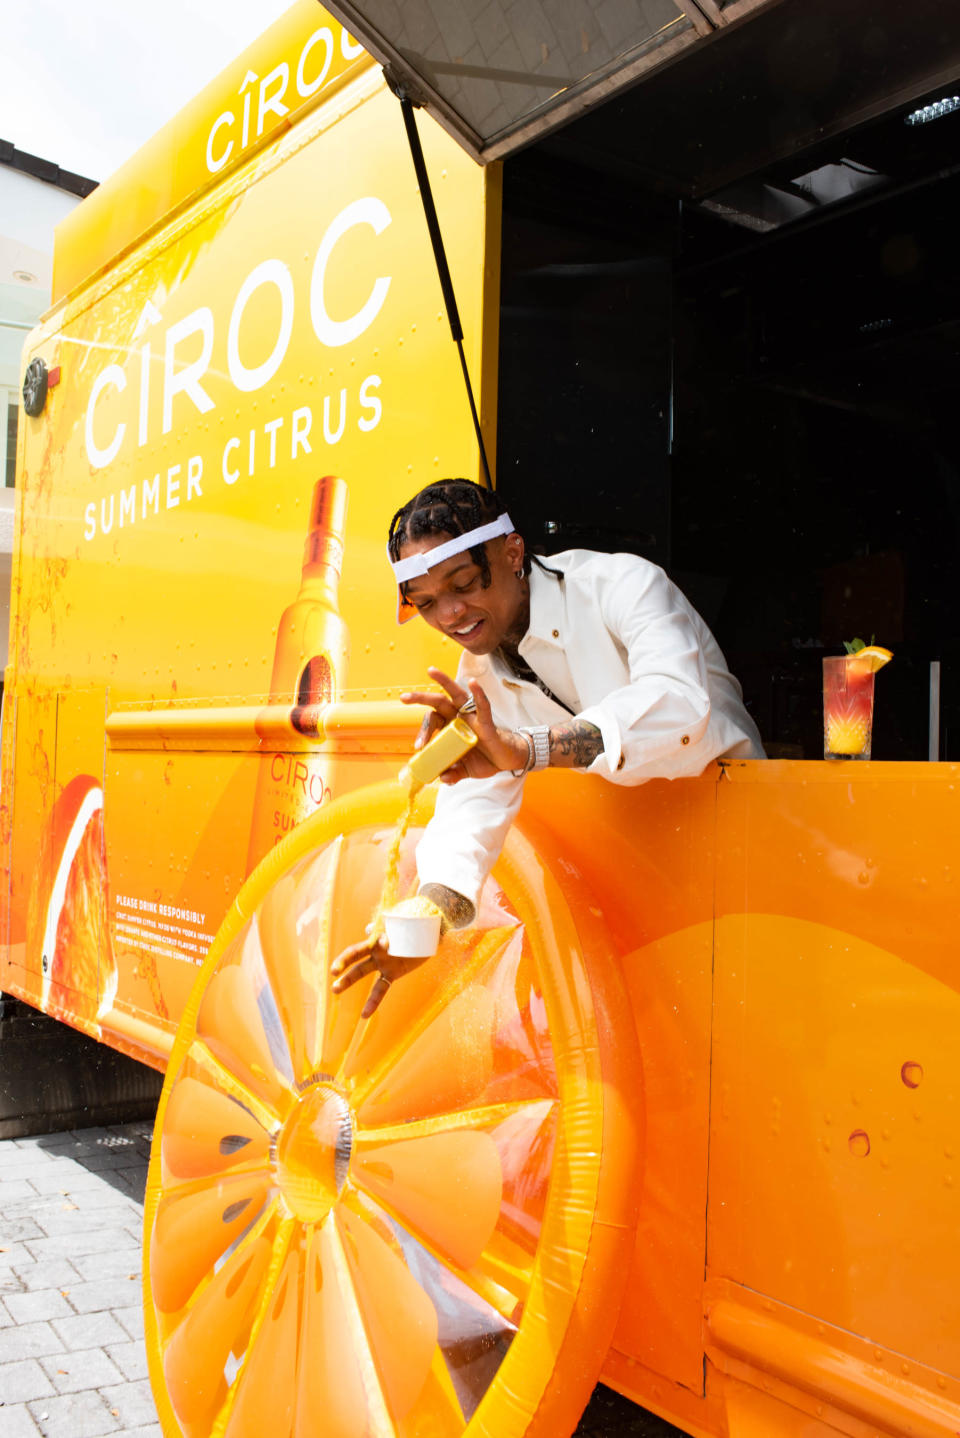 Inspired by the Flavors of C&#xce;ROC Summer Citrus, New &#x002018;Citrus Drip&#x002019; with Swae Sprinkles